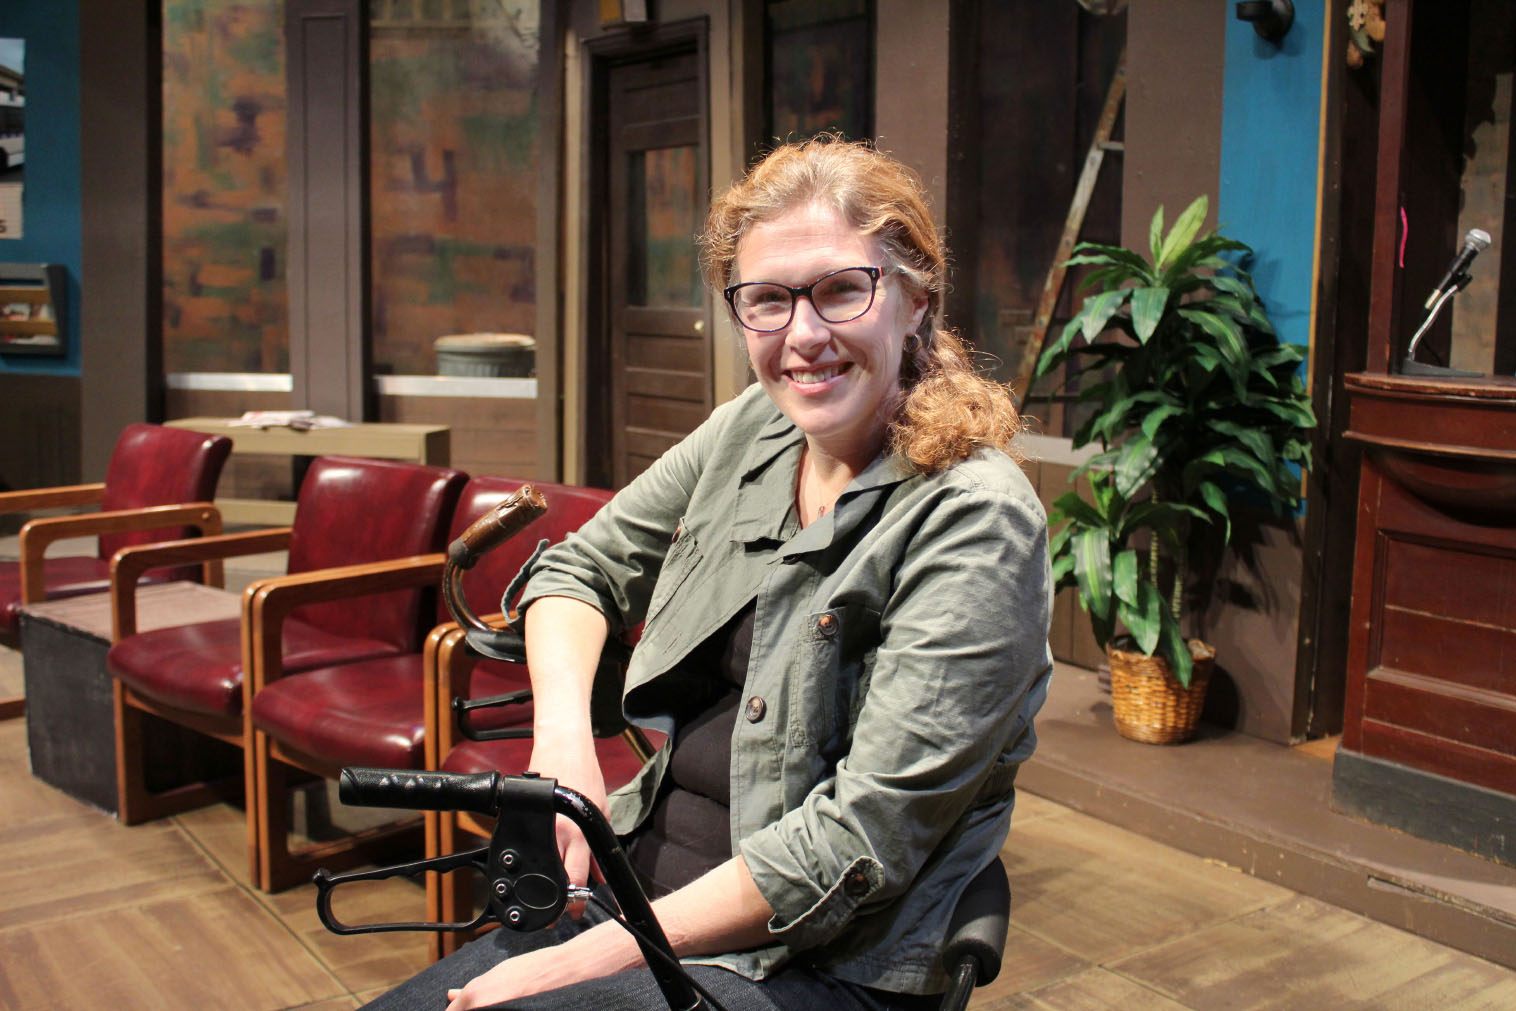 South Campus theater adjunct instructor Sherry Jo Ward sits in her walker throughout most of her play, which is based on her Stiff Person Syndrome diagnosis.